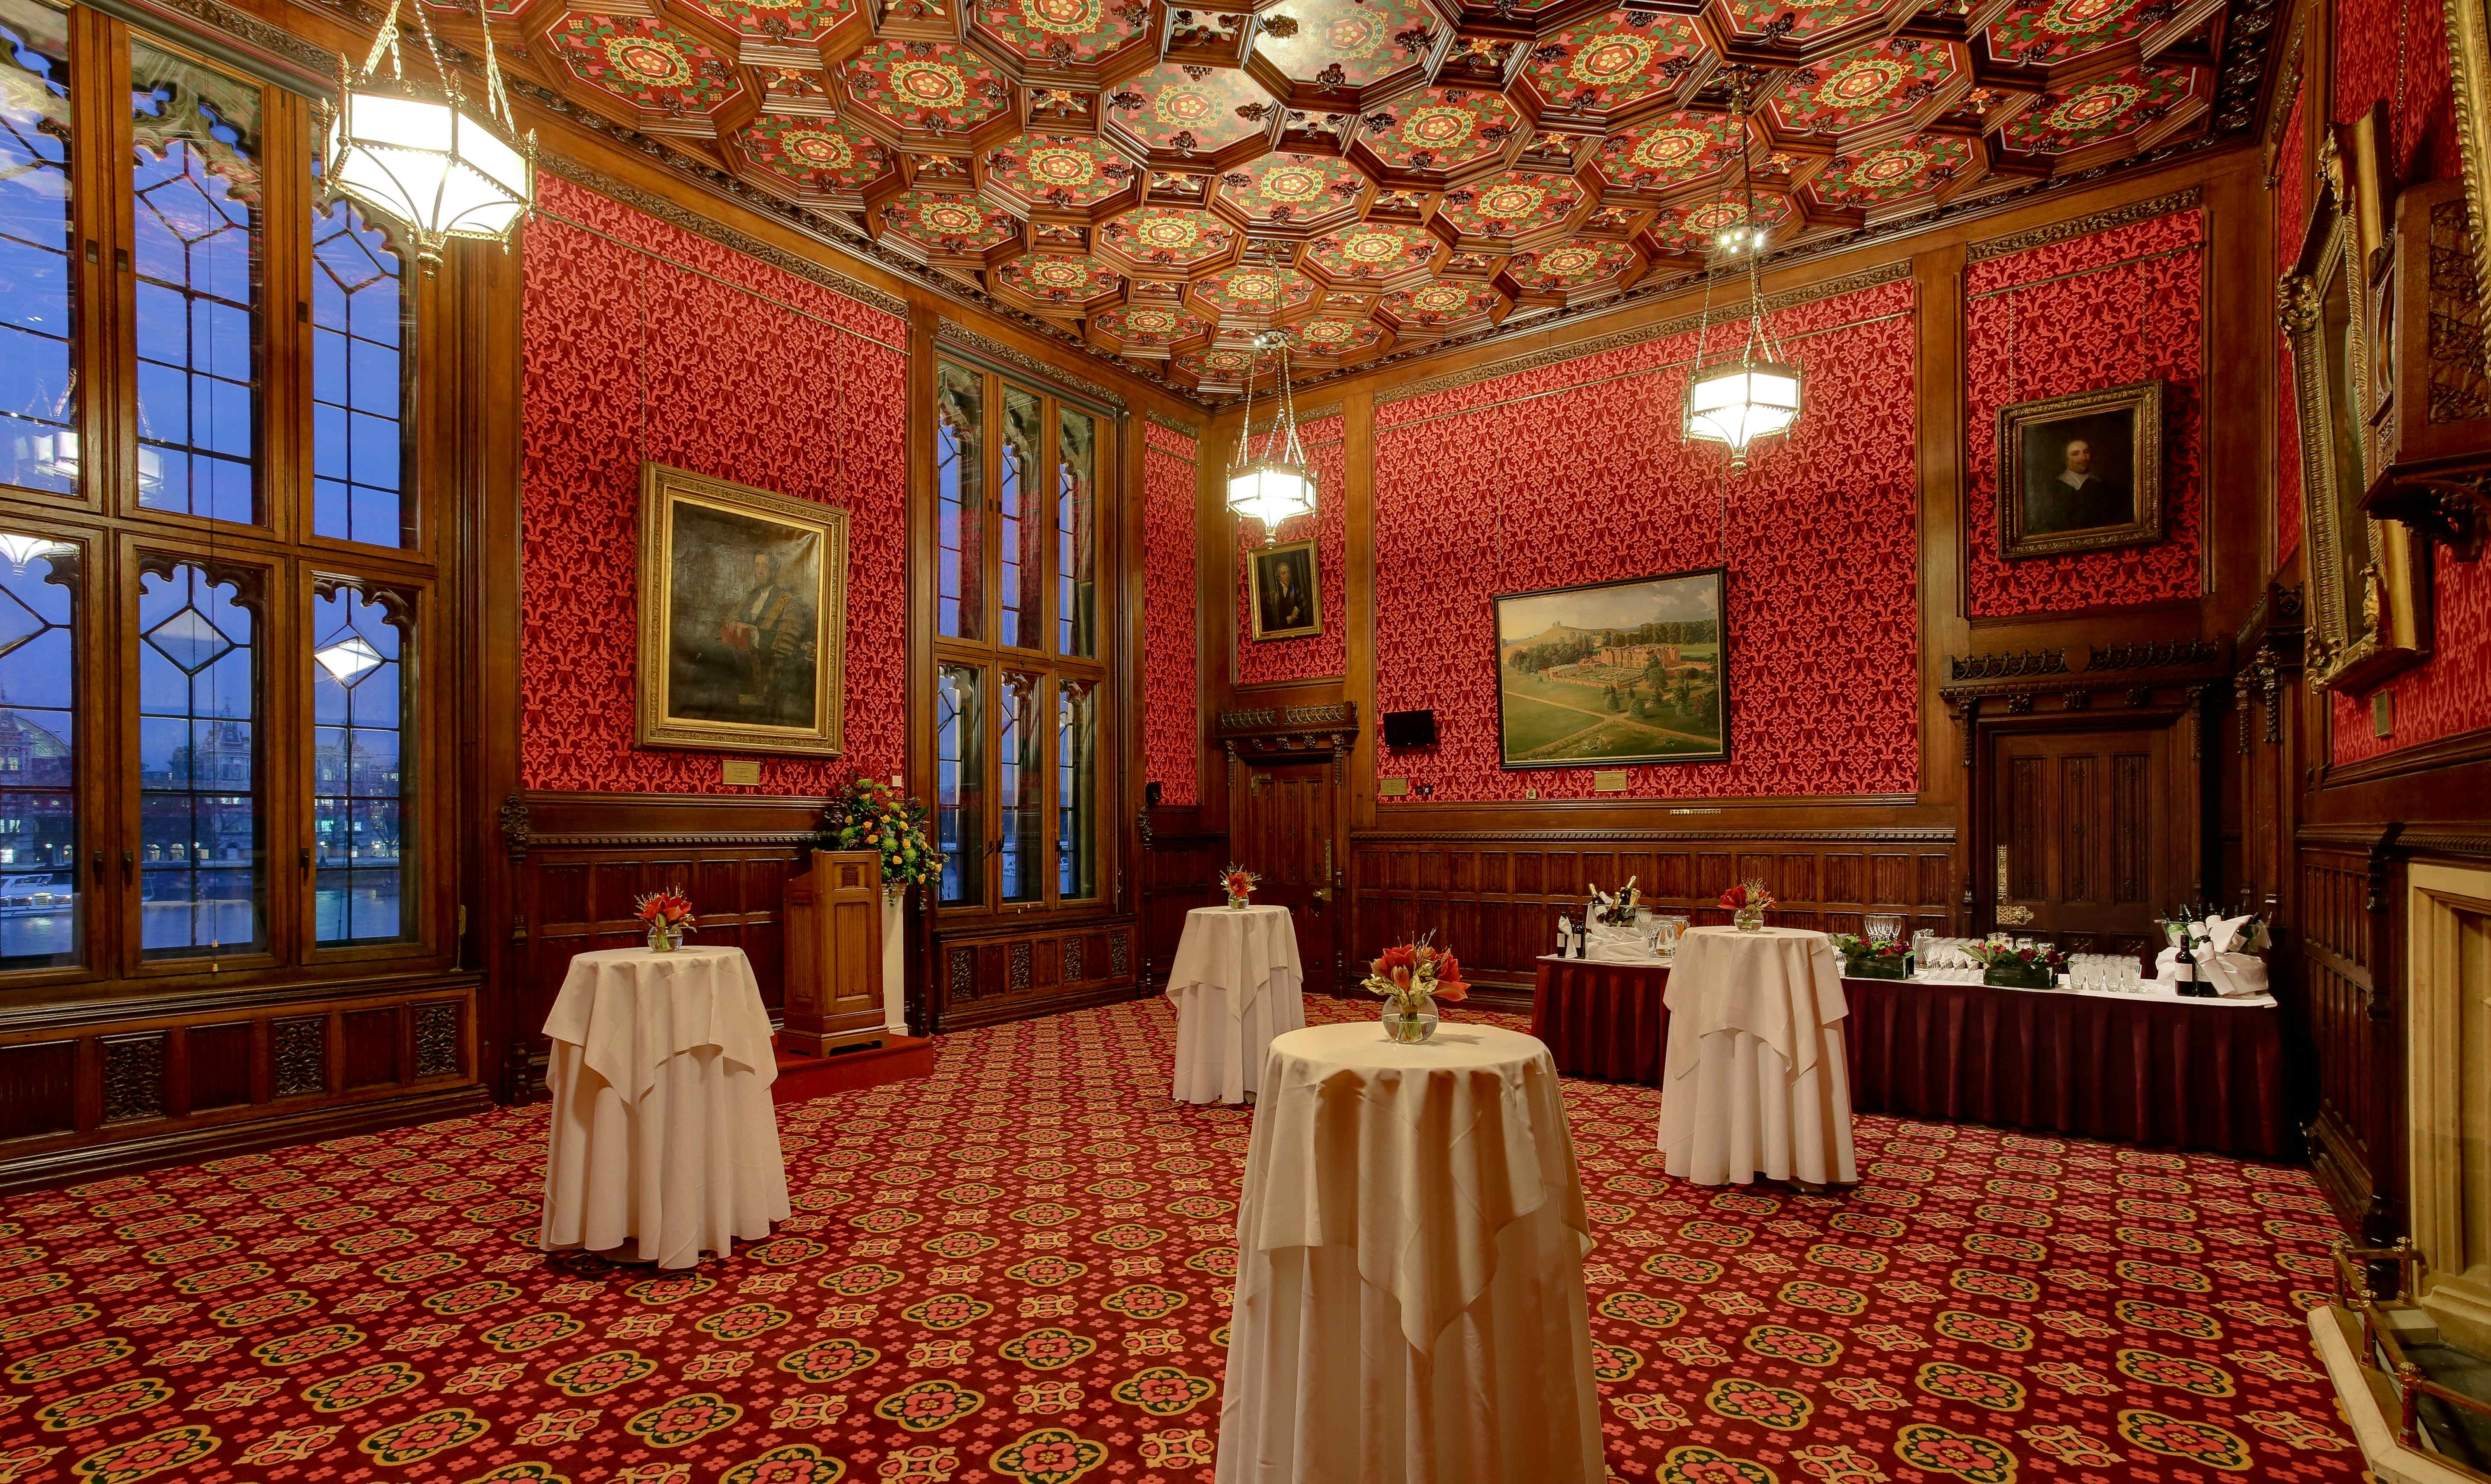 Strangers' Dining Room , House of Commons